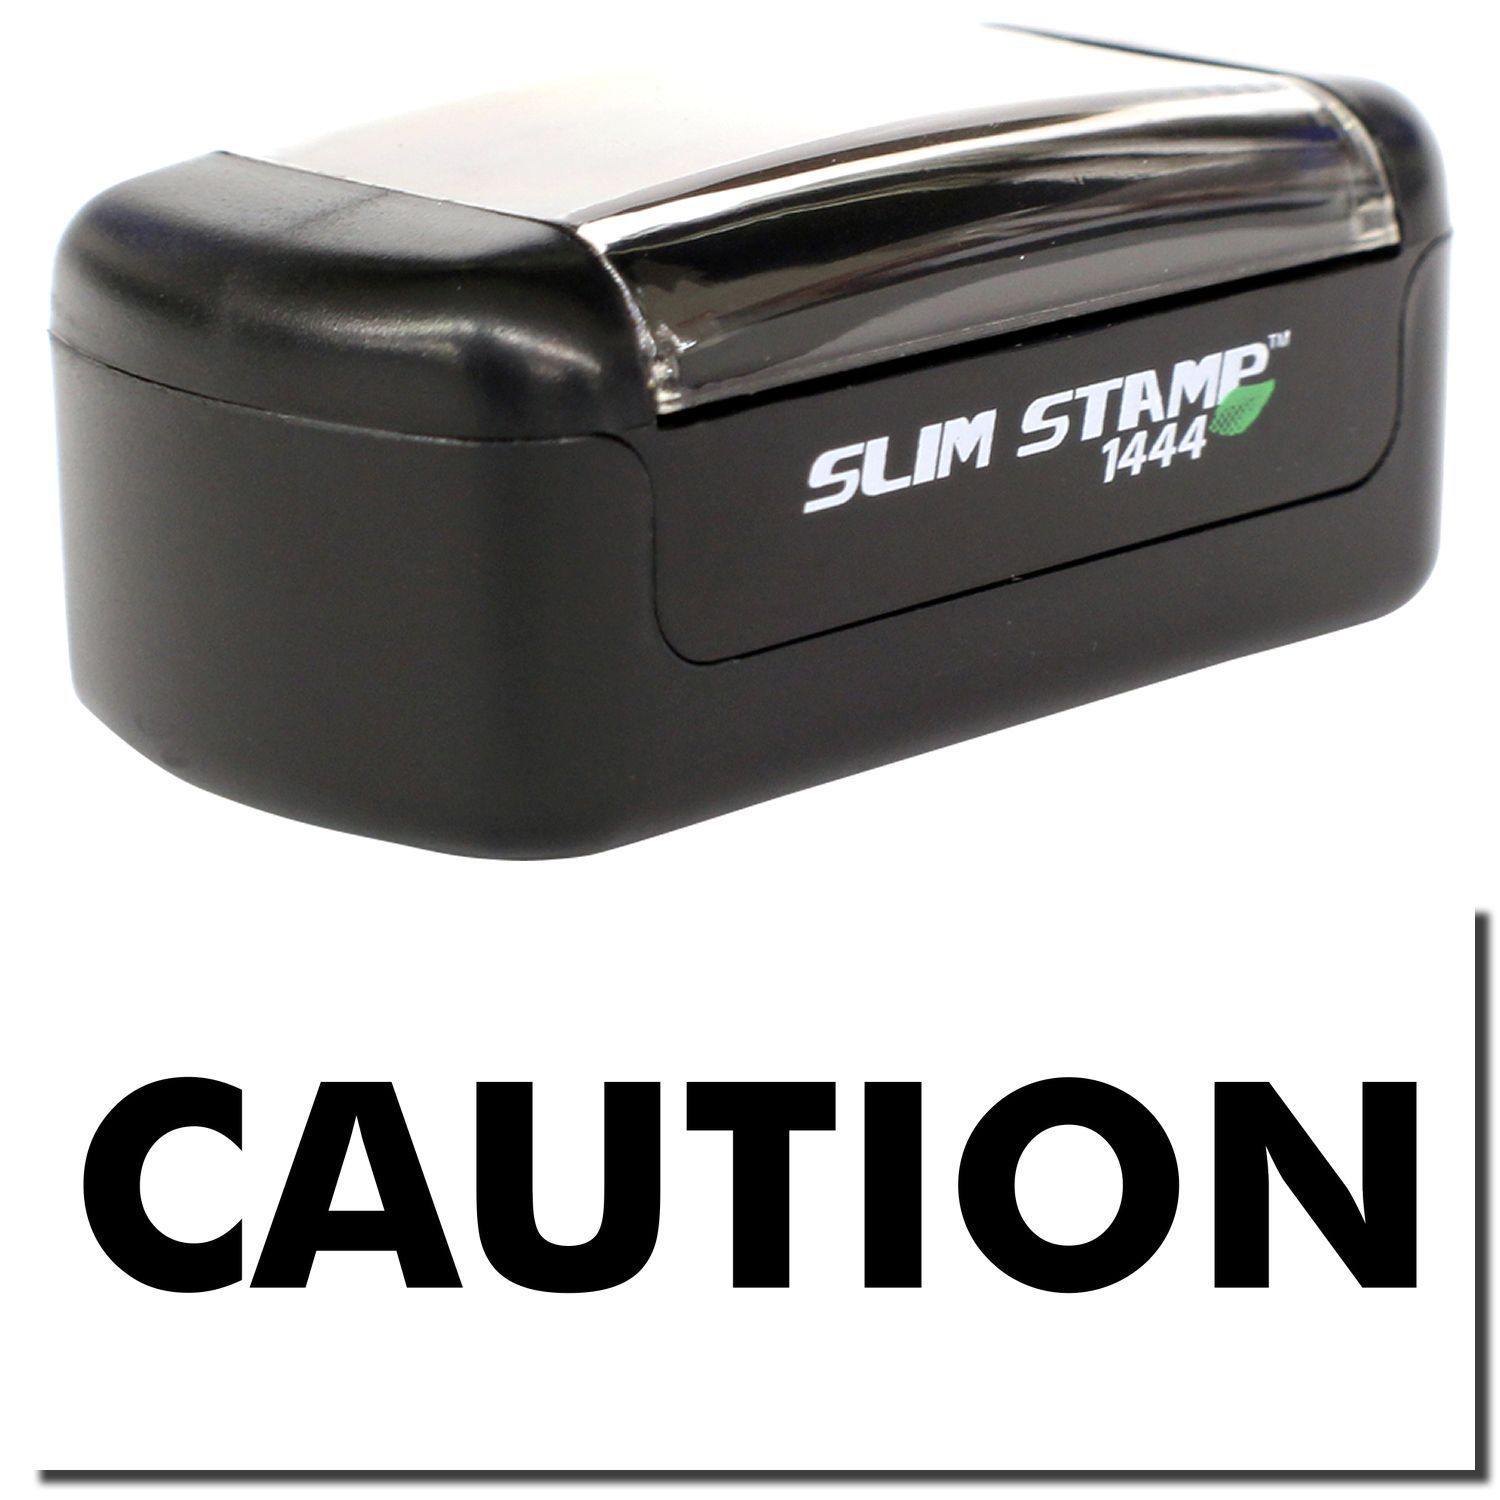 A stock office pre-inked stamp with a stamped image showing how the text "CAUTION" is displayed after stamping.